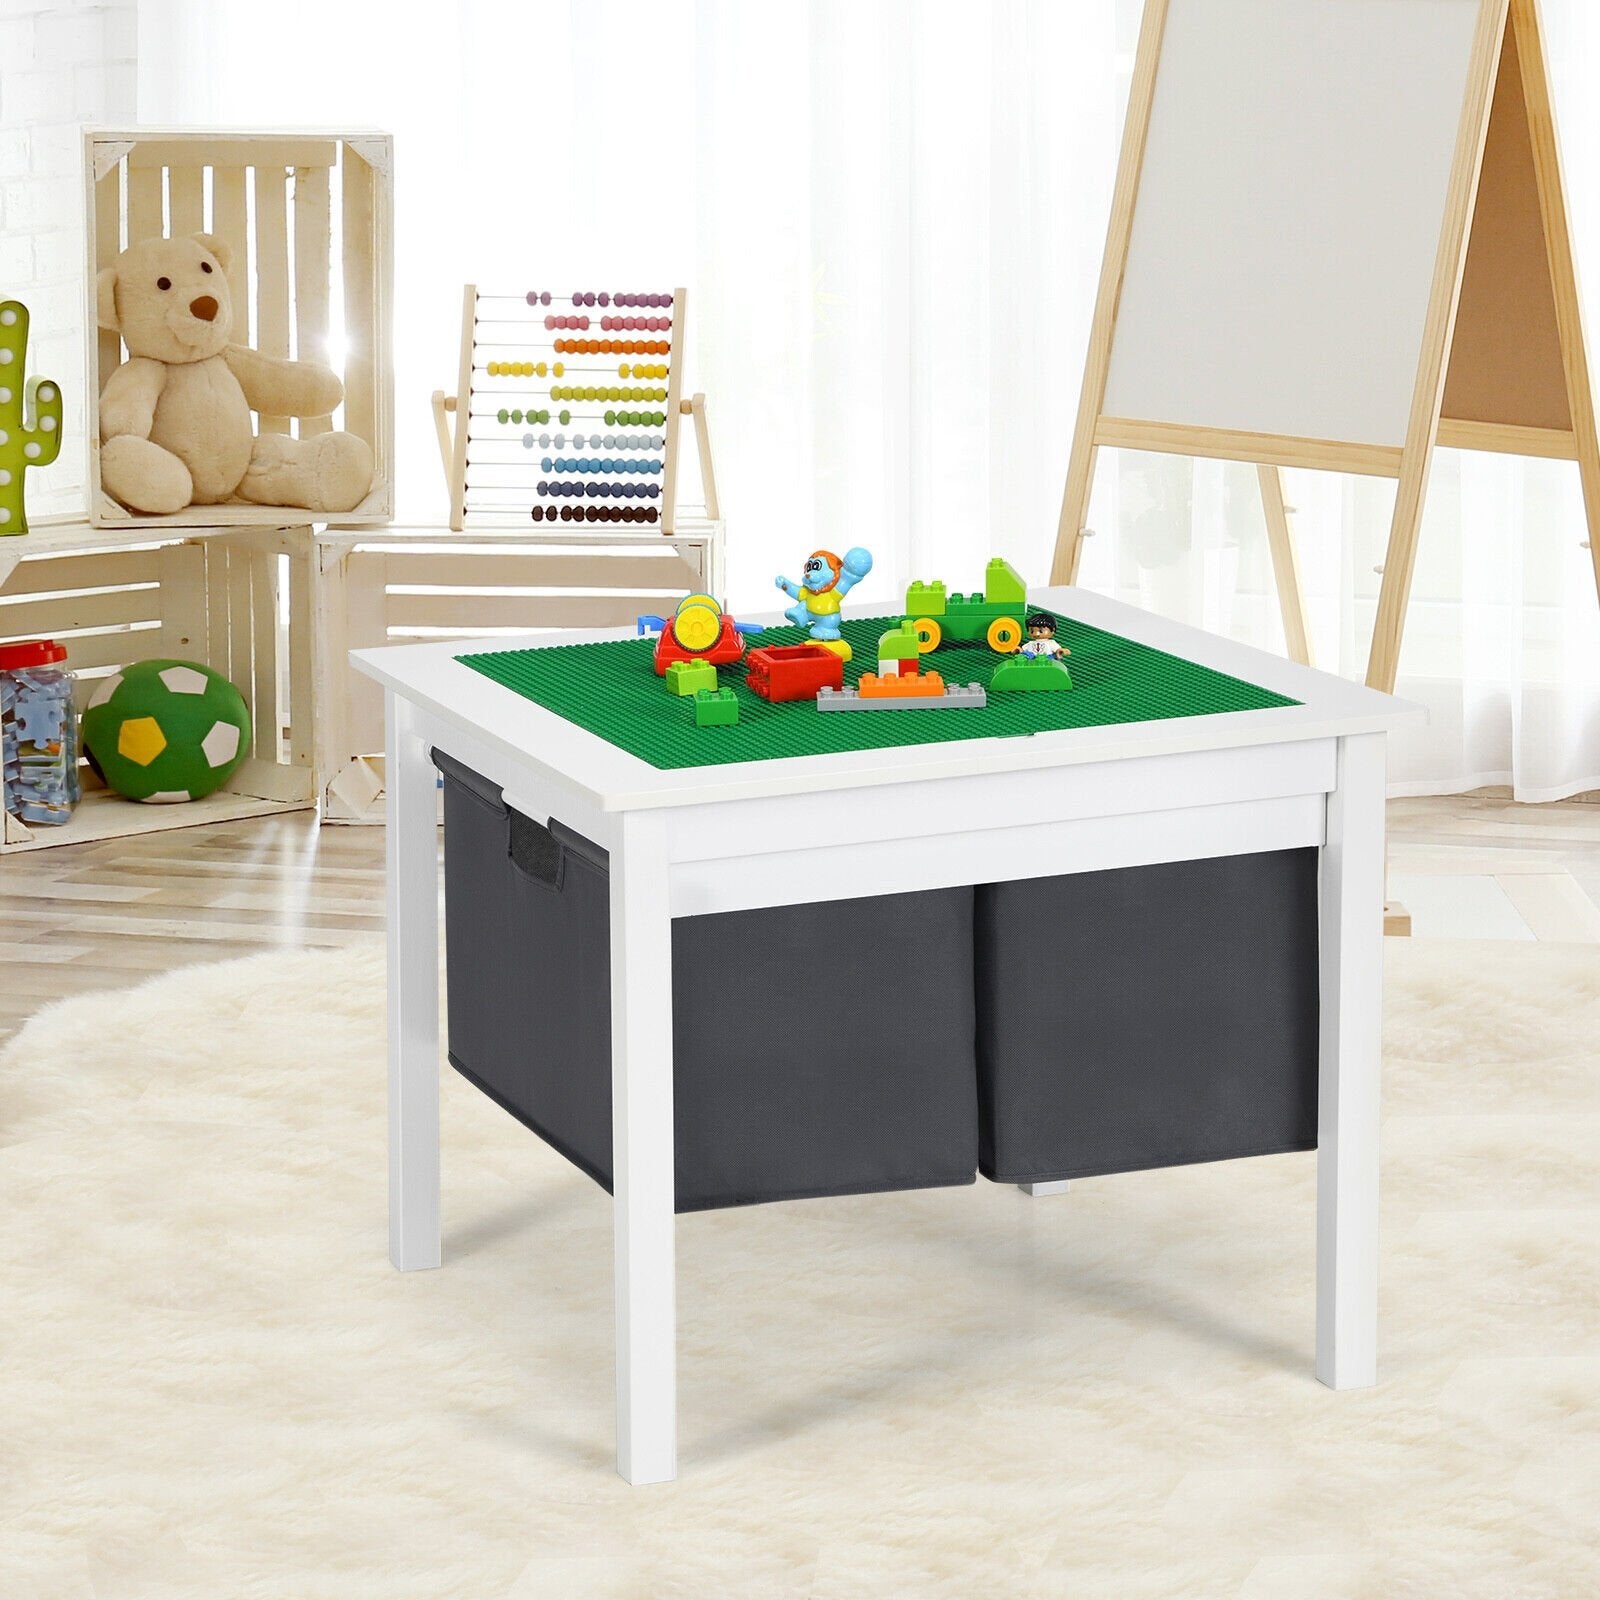 2-in-1 Kids Double-sided Activity Building Block Table with Drawers at Gallery Canada